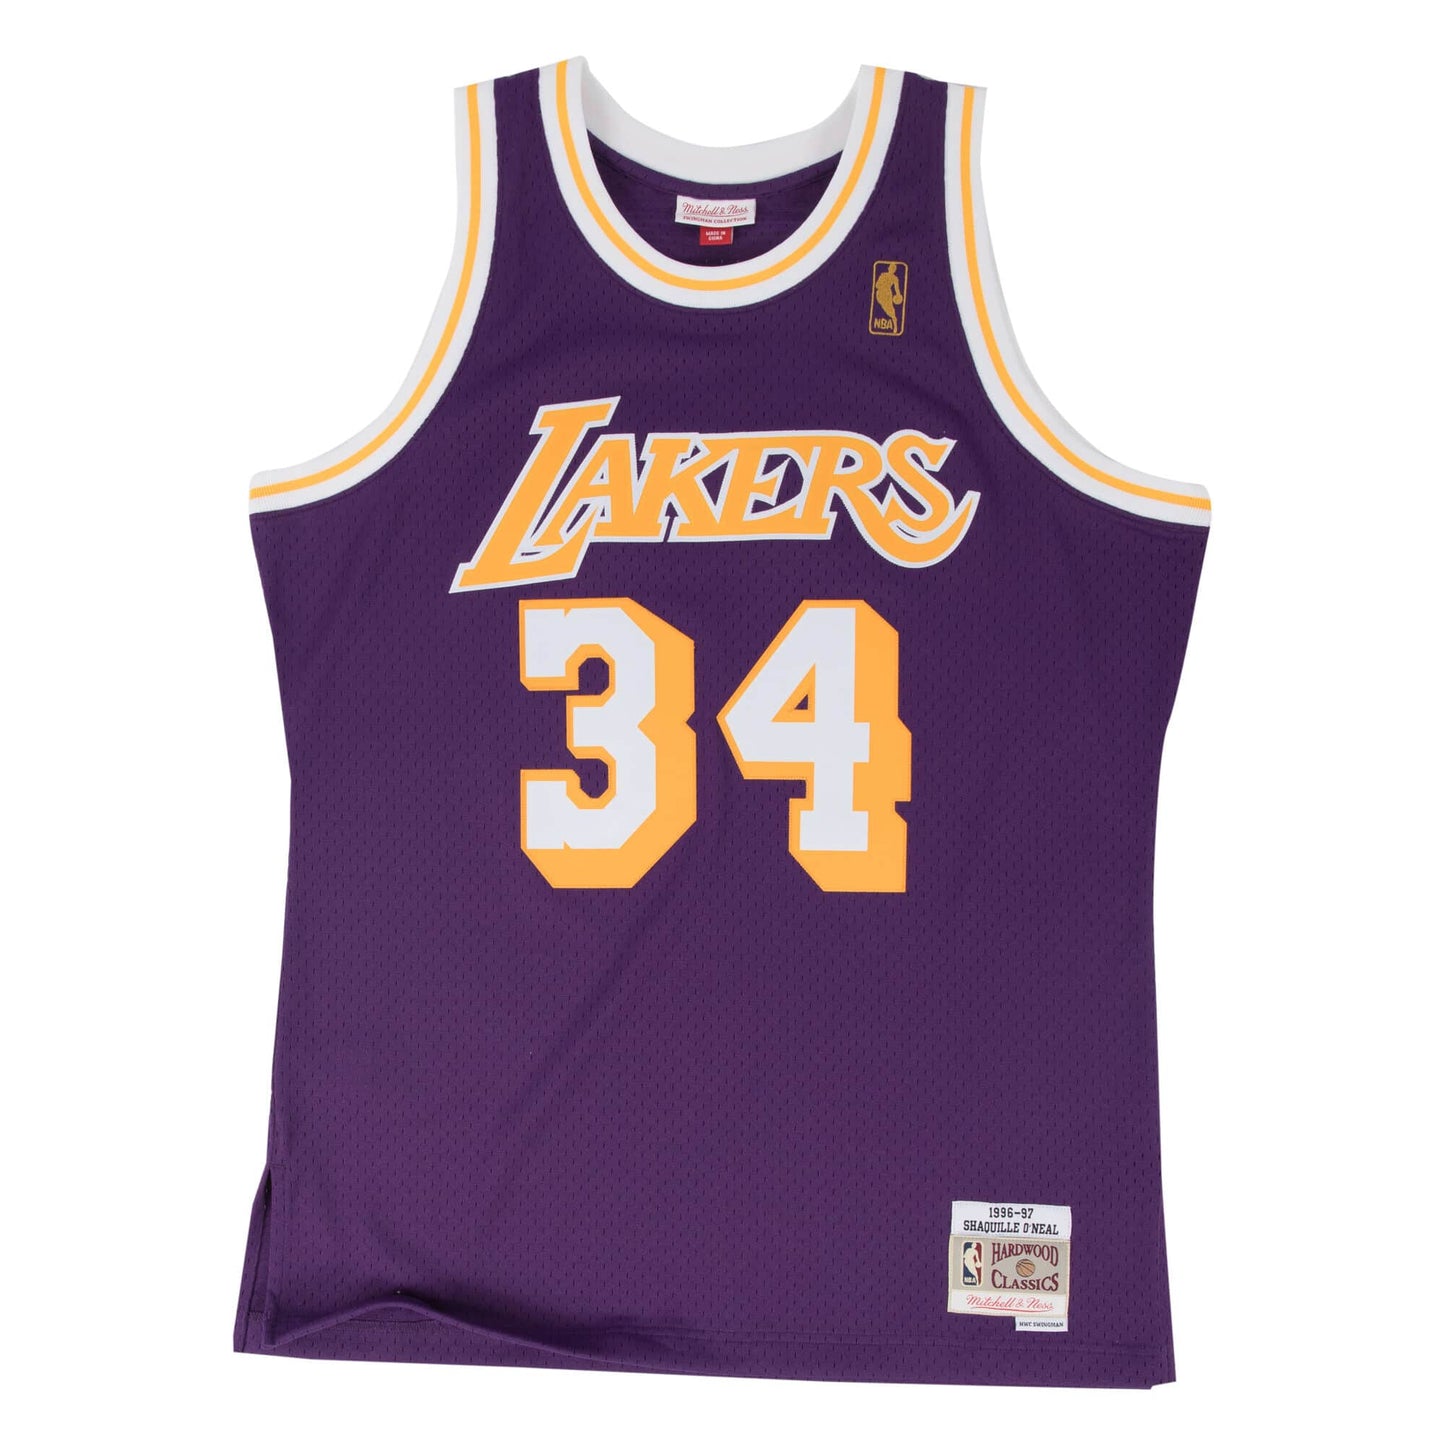 Los Angeles Lakers Shaquille O'Neal Mitchell and Ness Swingman Jersey - Purple (1996-97)